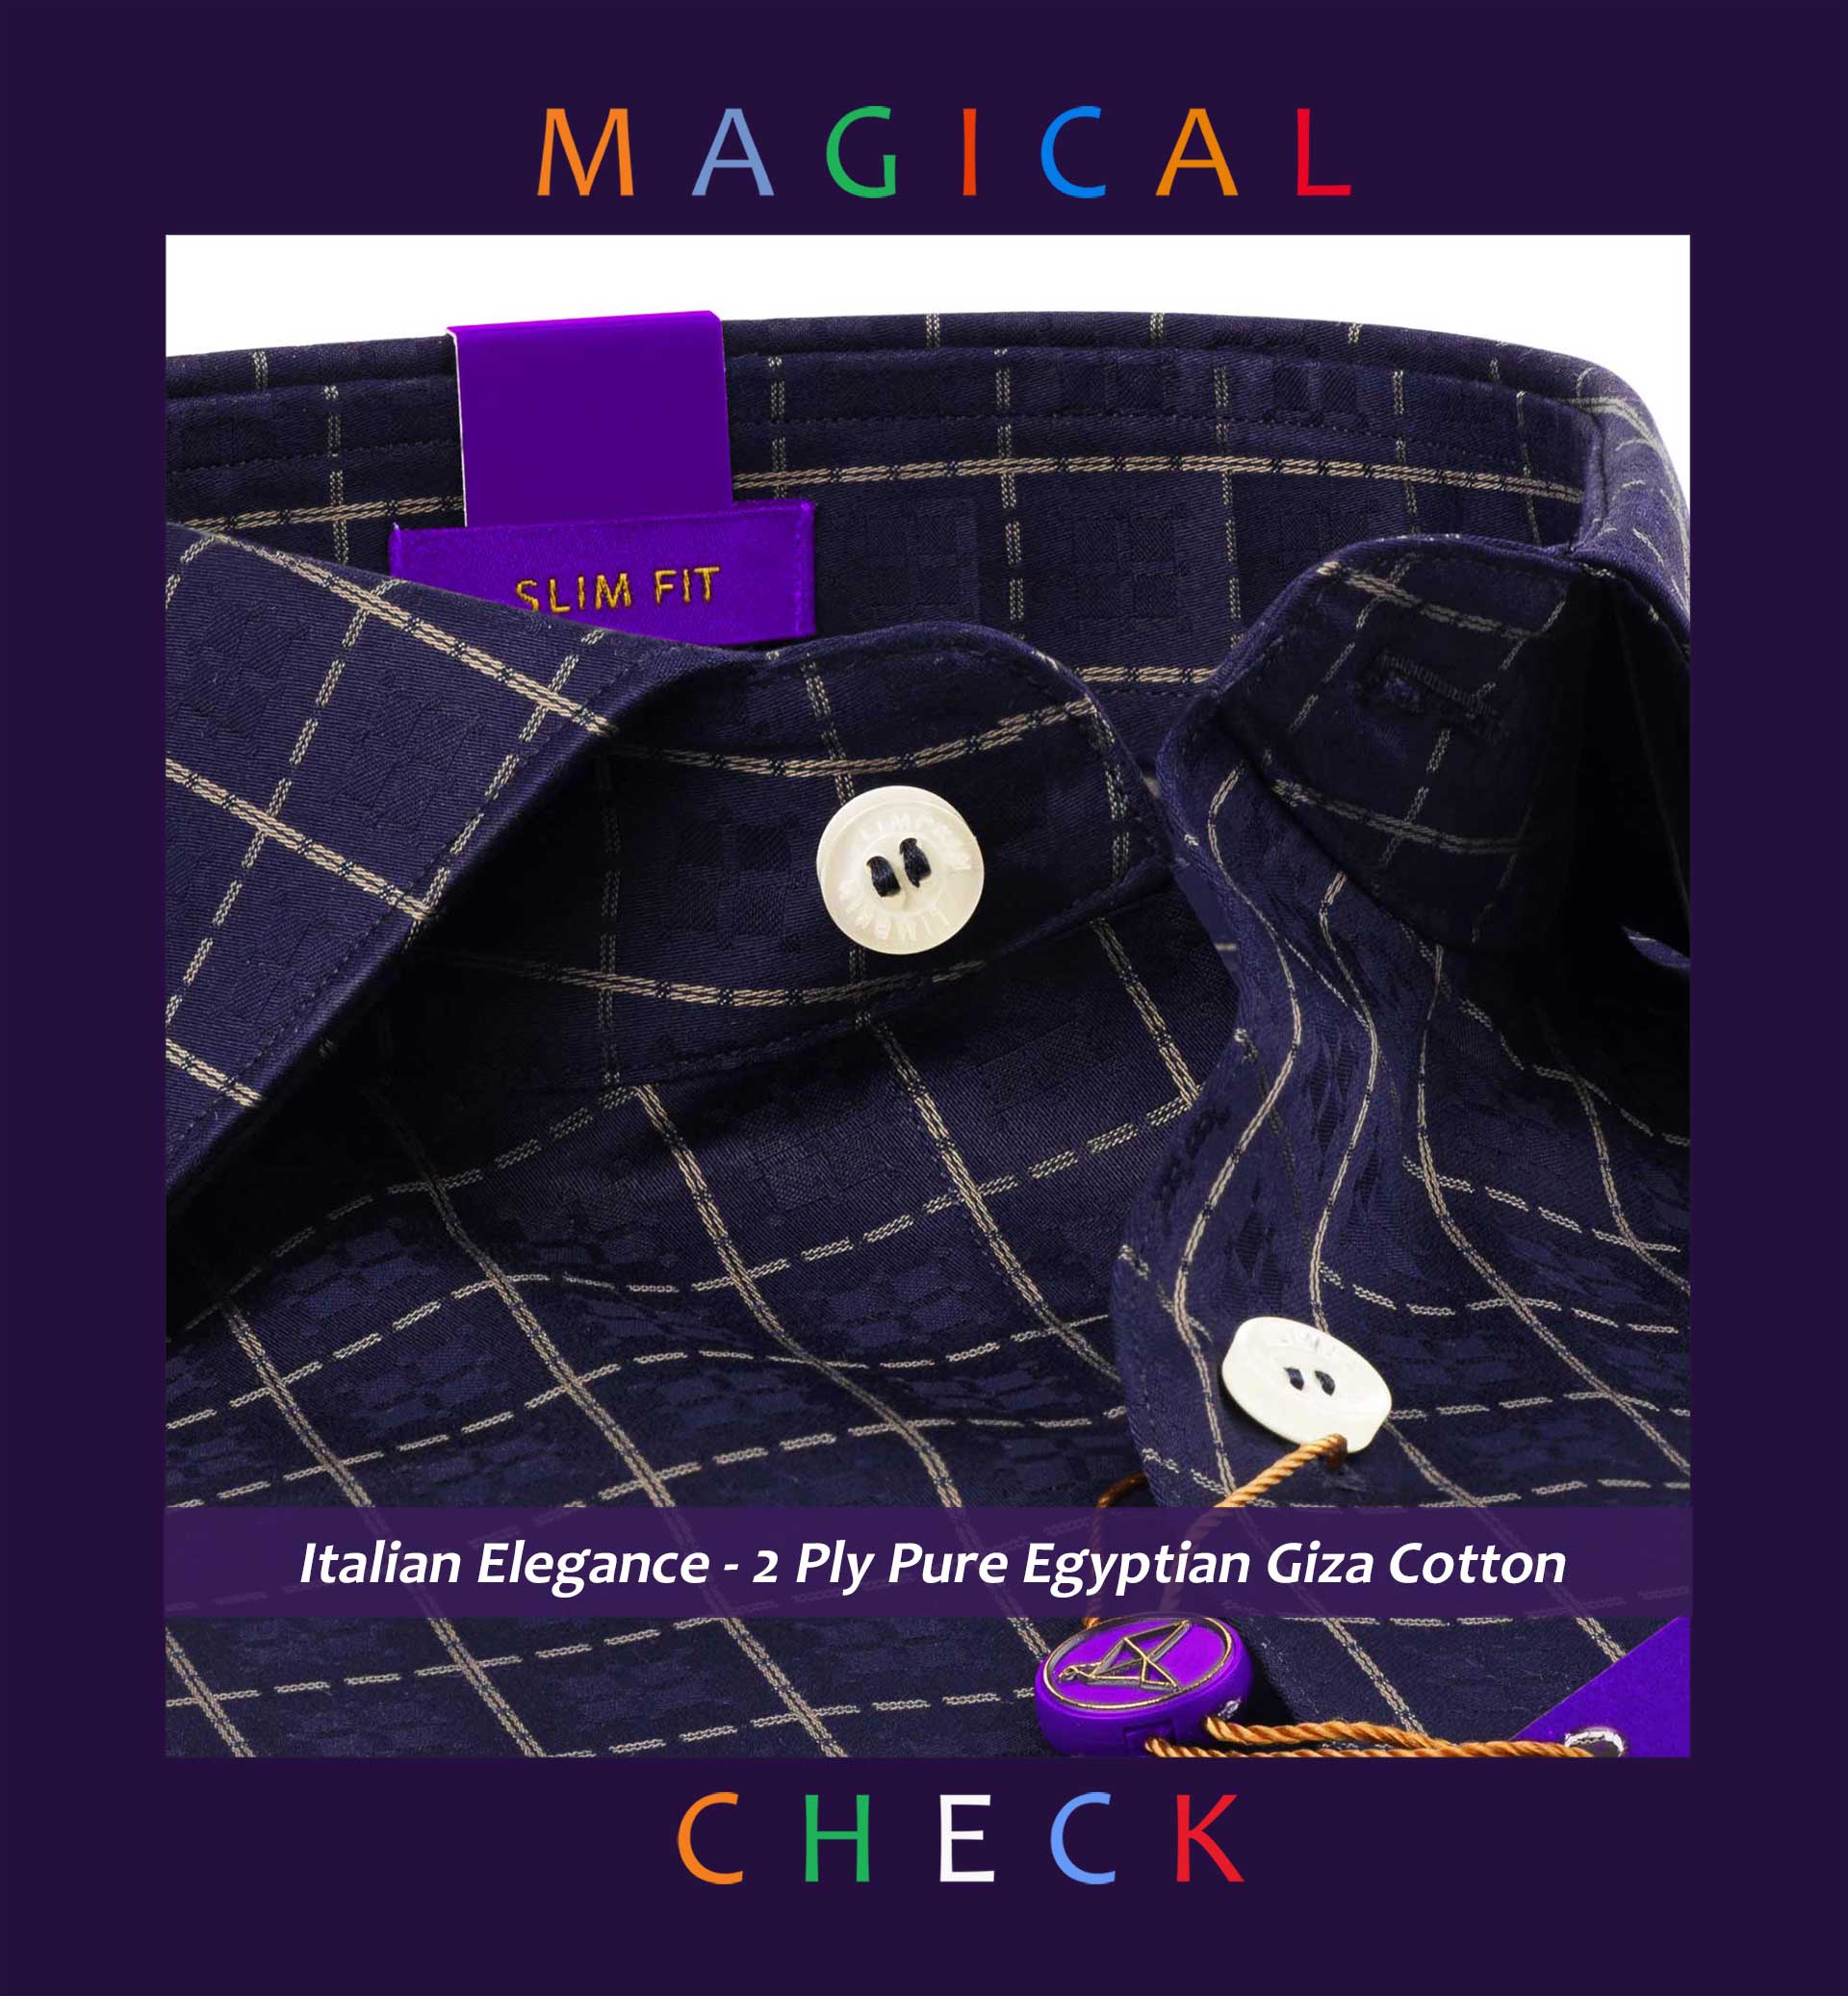 Serbia- Navy & Beige Magical Check